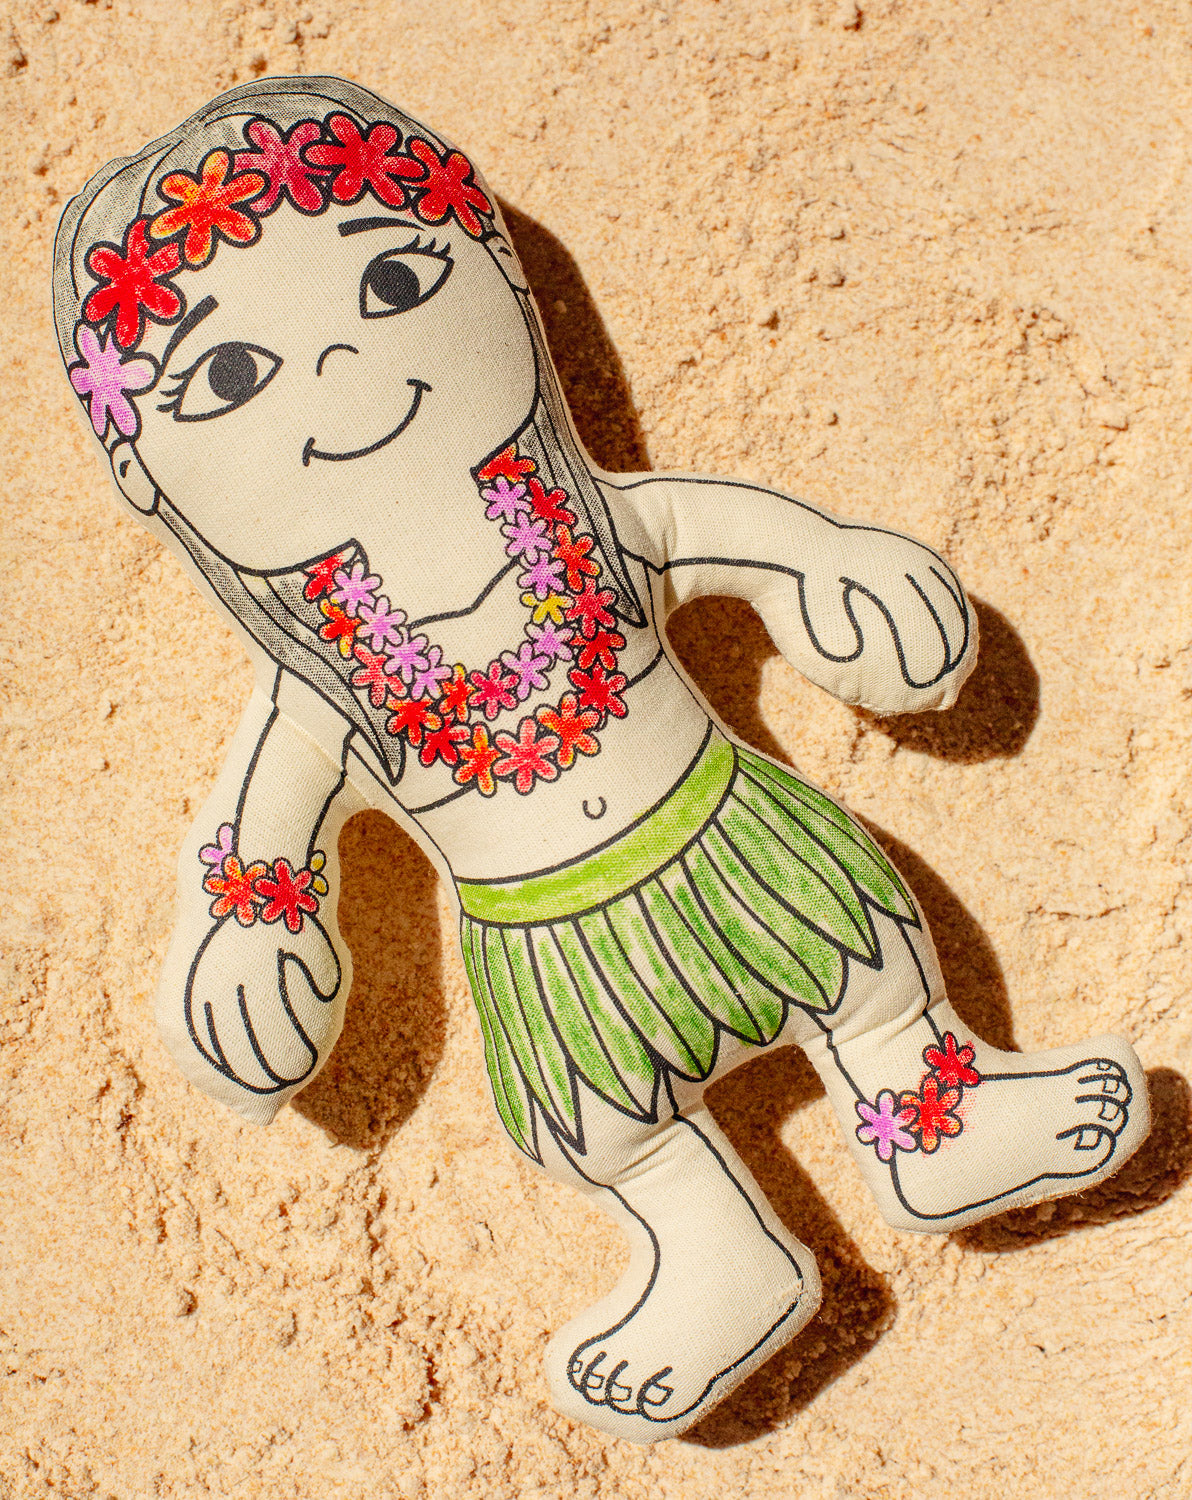 Kiboo Kids: Hula Girl with Mini Pineapple Backpack - Colorable and Washable Doll for Creative Play